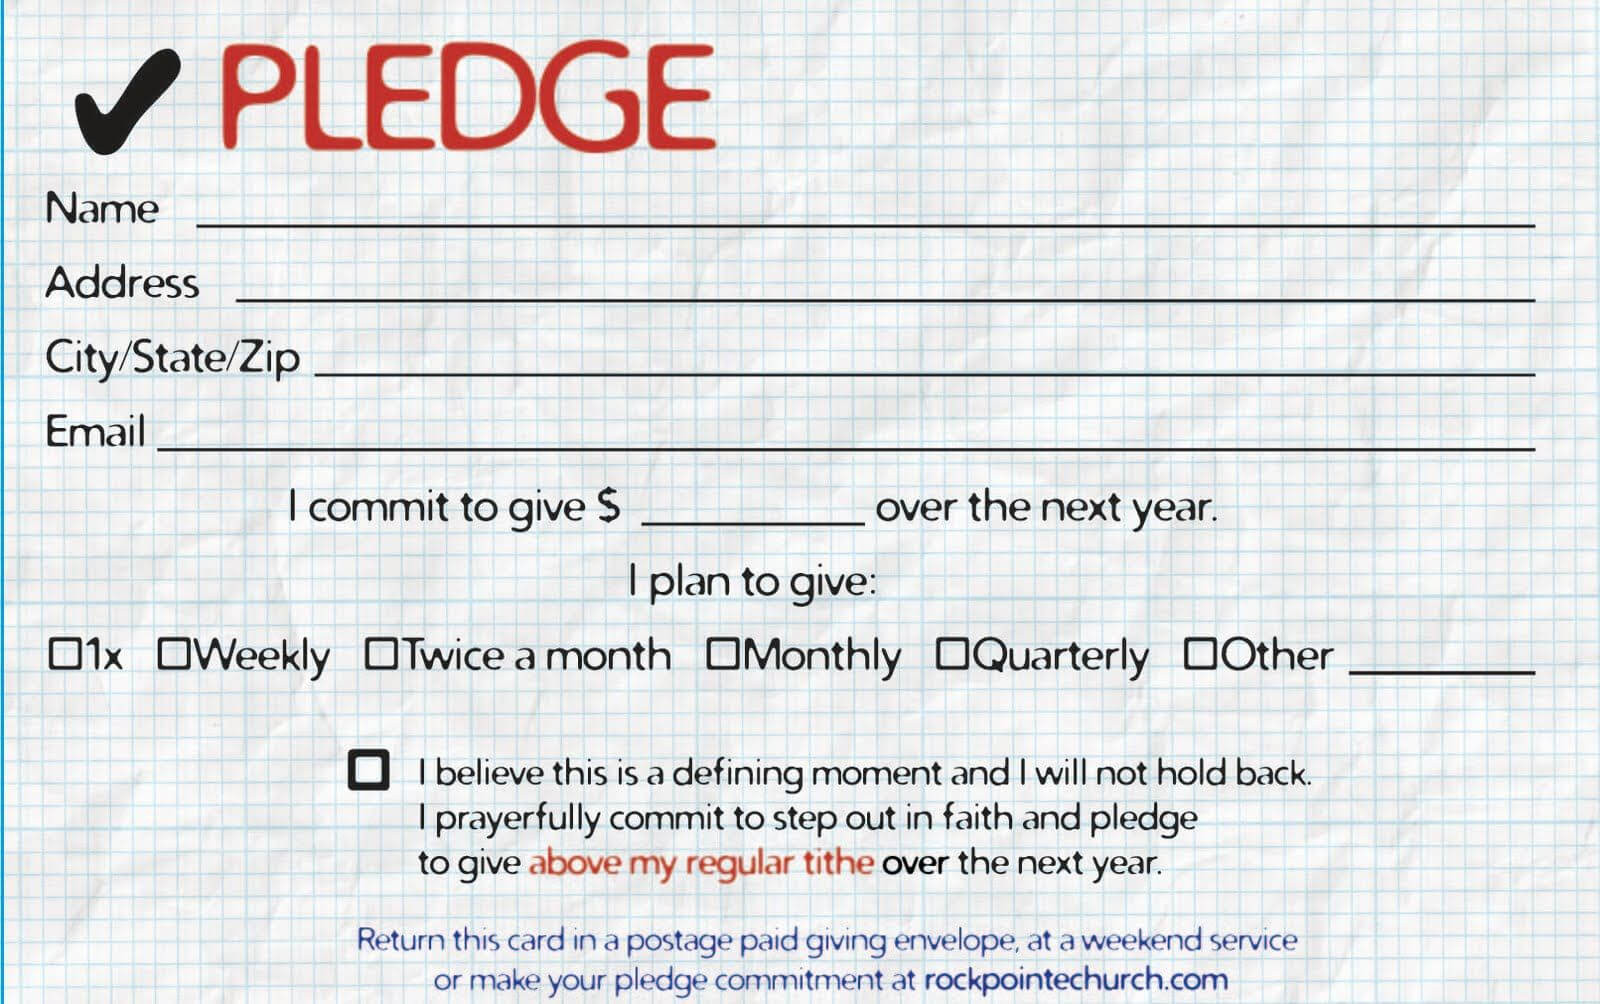 Pledge Cards For Churches | Pledge Card Templates | Card Pertaining To Building Fund Pledge Card Template